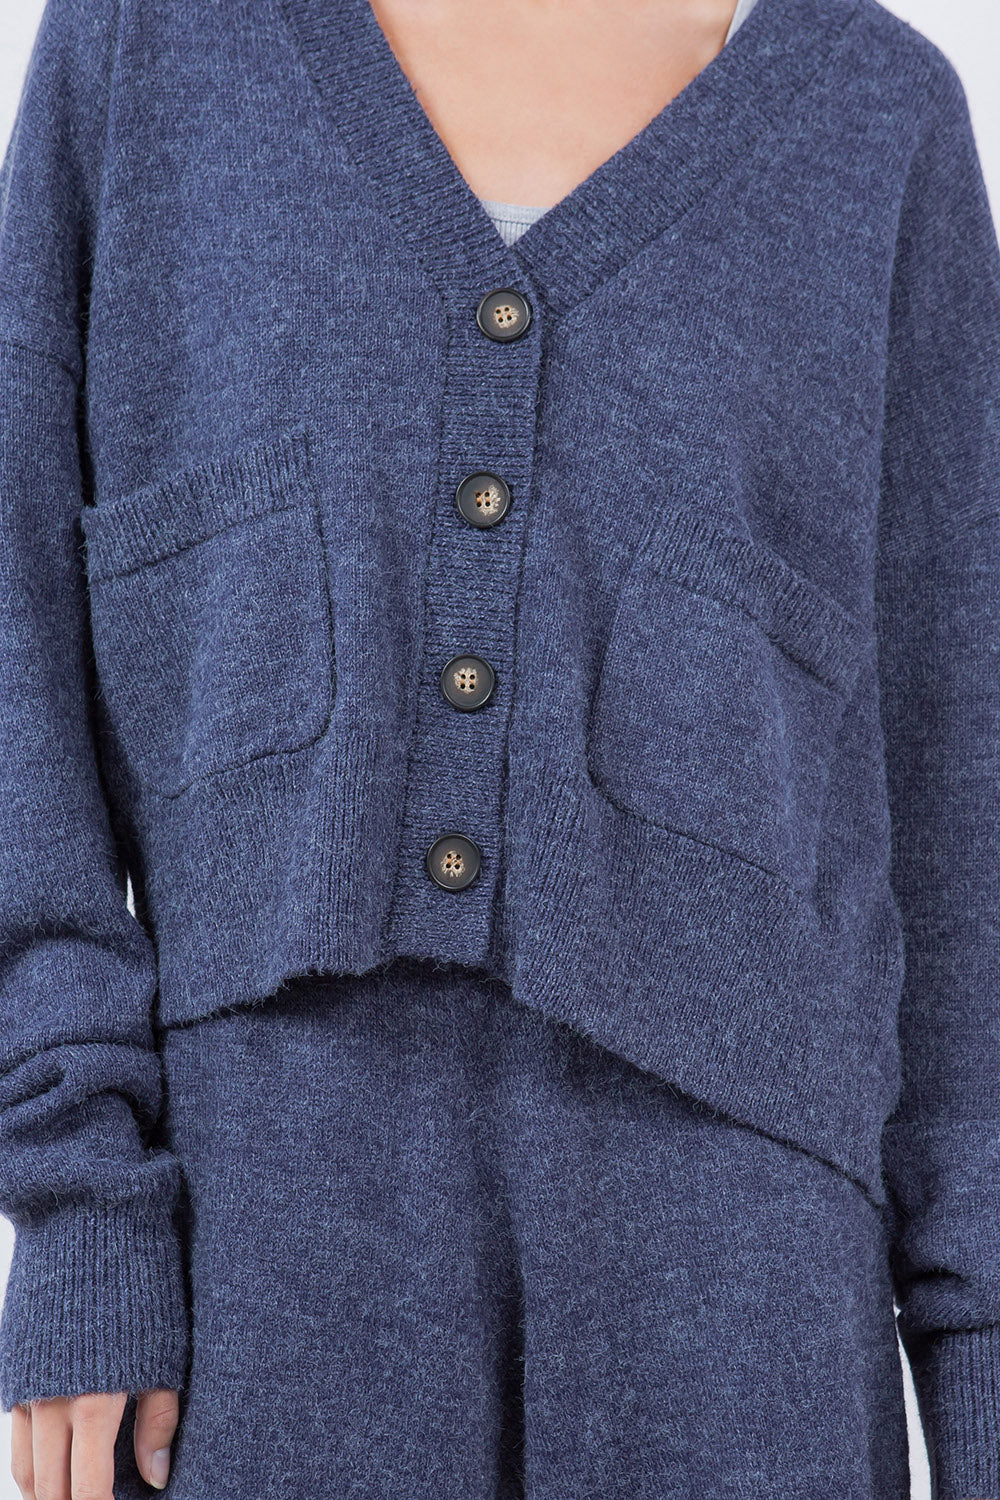 CARDIGAN SWEATER WITH POCKETS NAVY